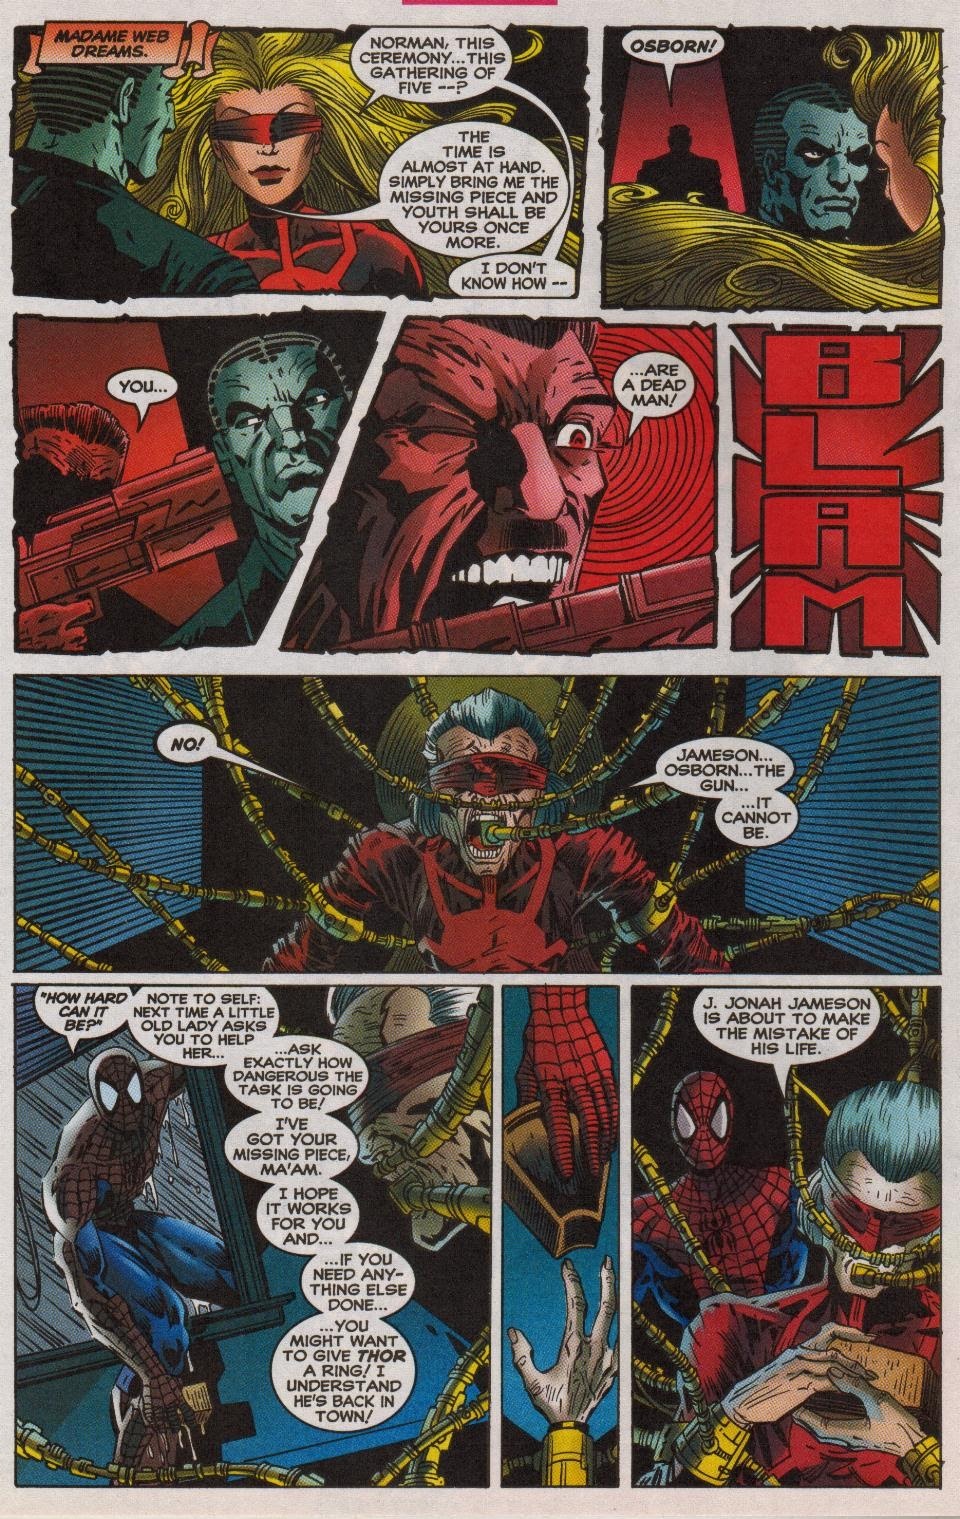 Madame Web foresees J. Jonah Jameson attempting to murder Norman Osborn in the future. (Spider-Man vol 1 #96)